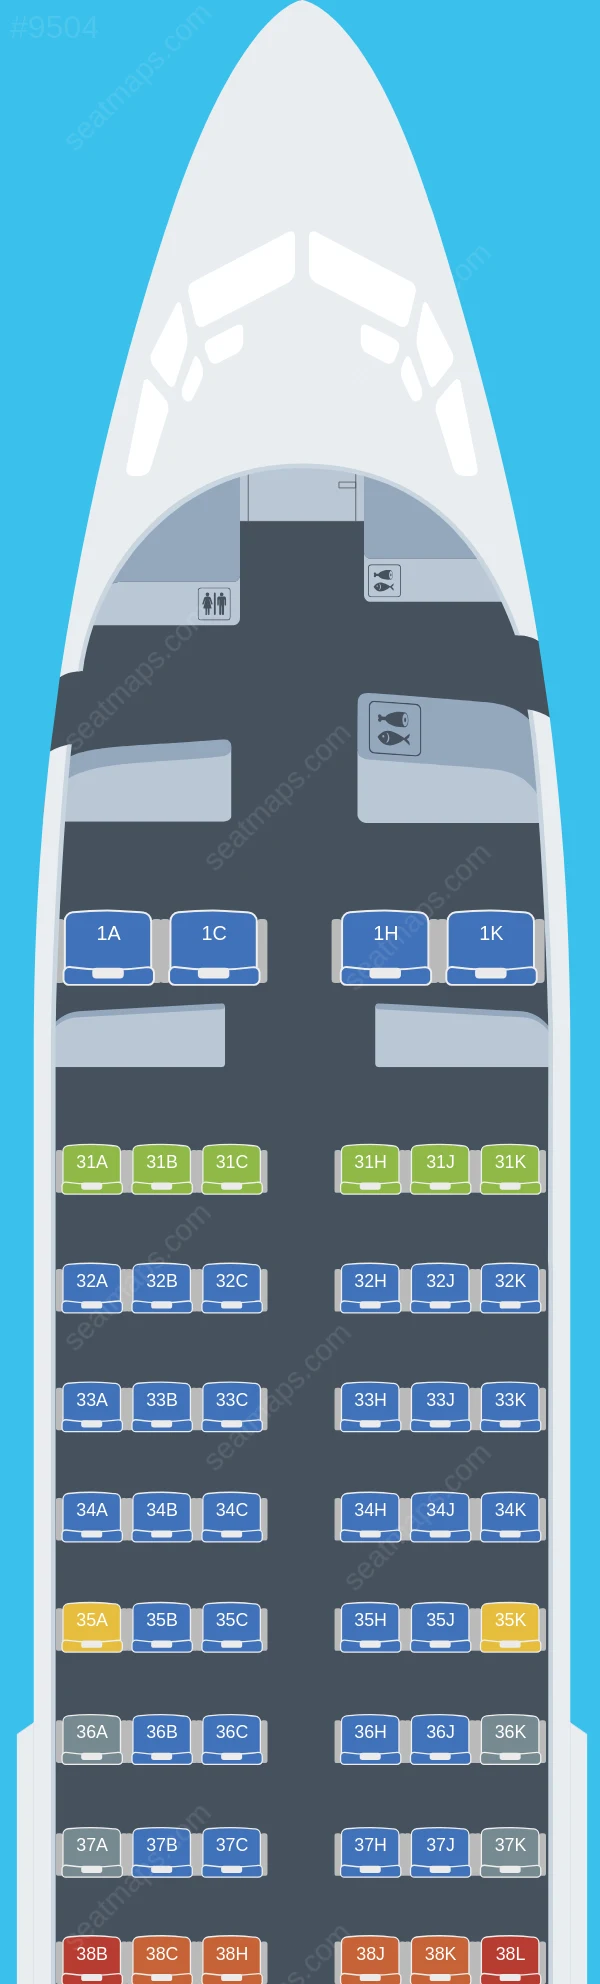 China Southern Boeing 737-700 V.4 seatmap preview